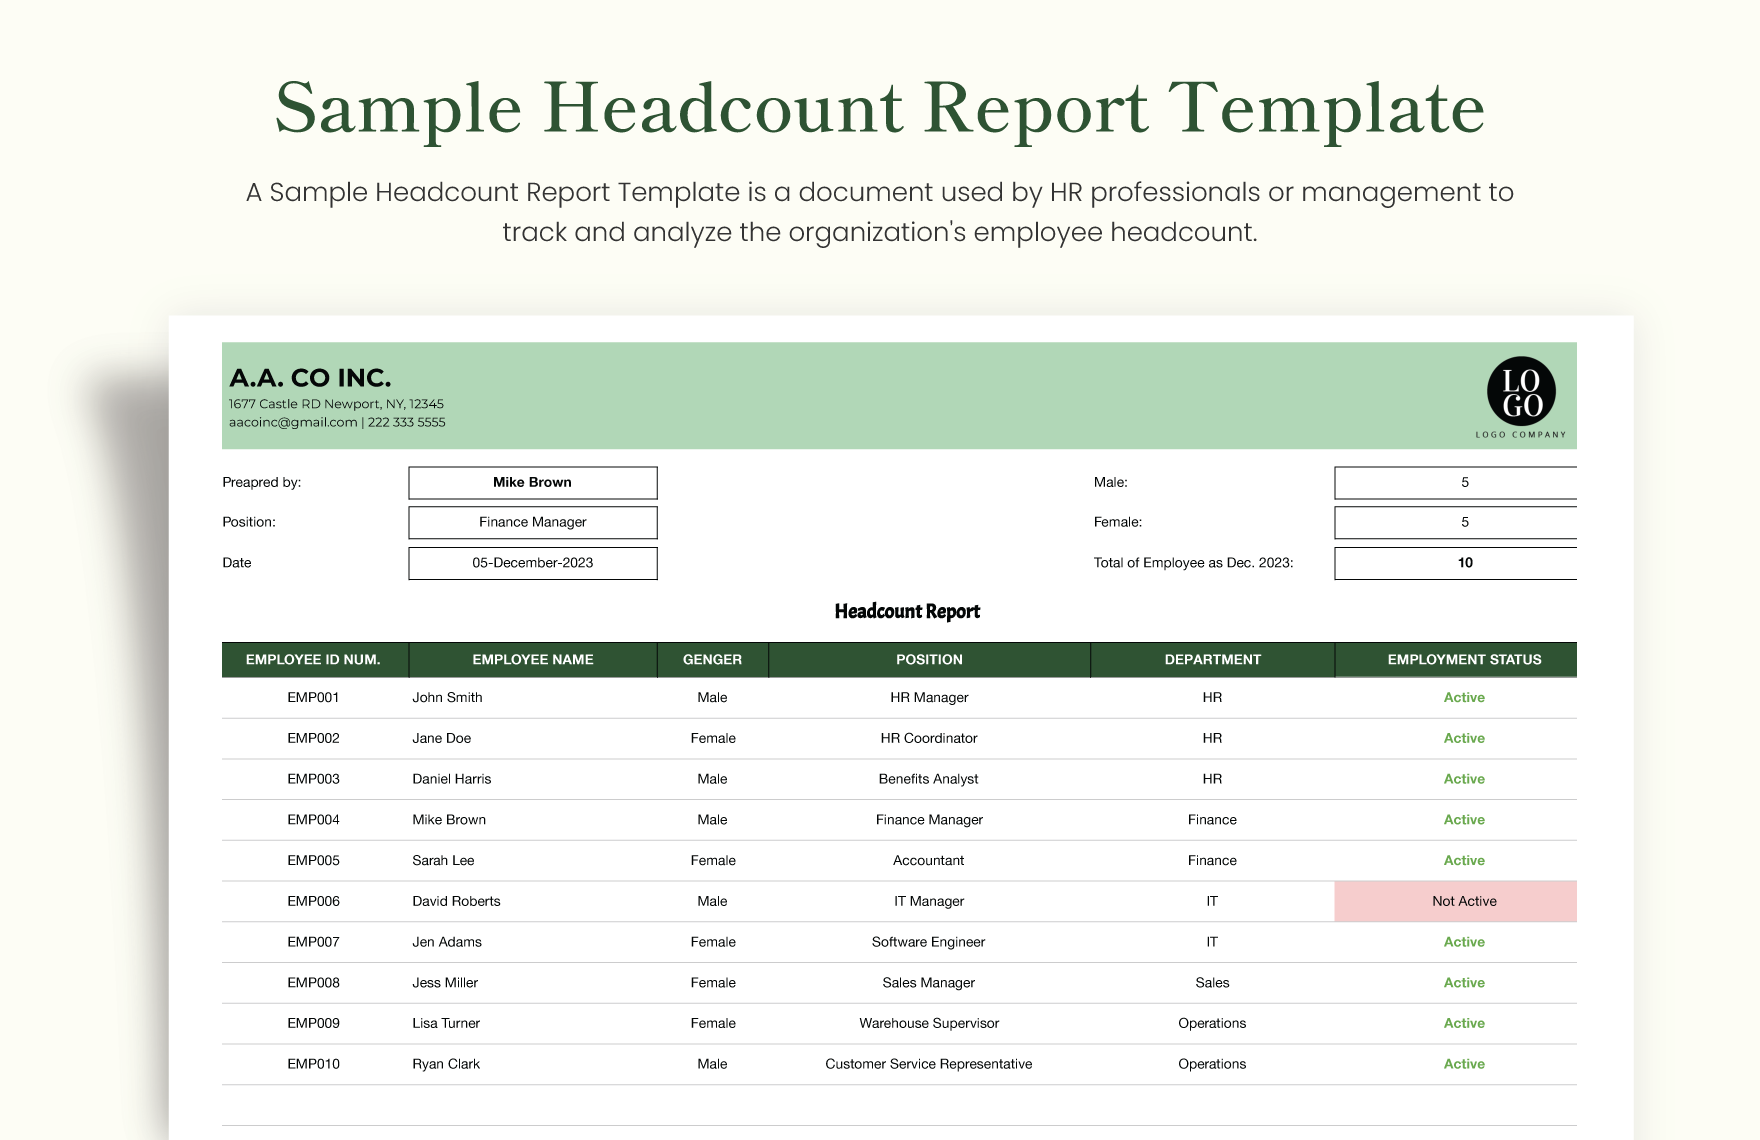 Free Sample Headcount Report Template in Excel, Google Sheets